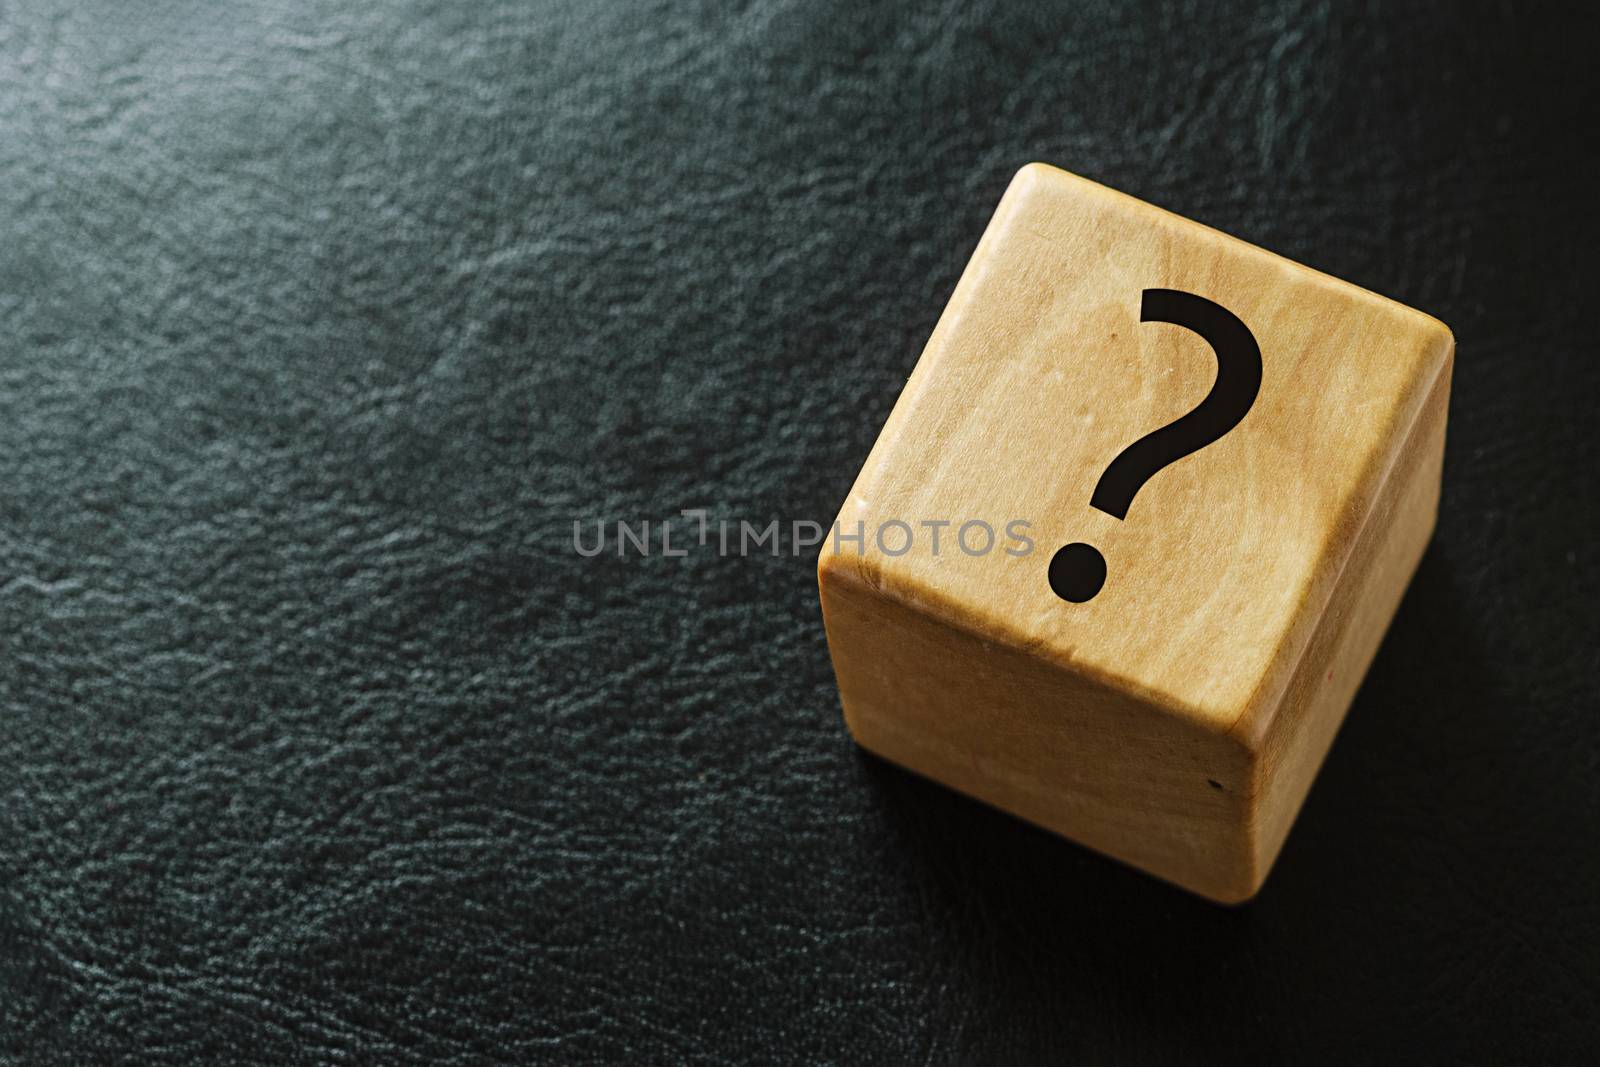 Wooden cube on black leather with question mark printed on one side viewed from above with copy space